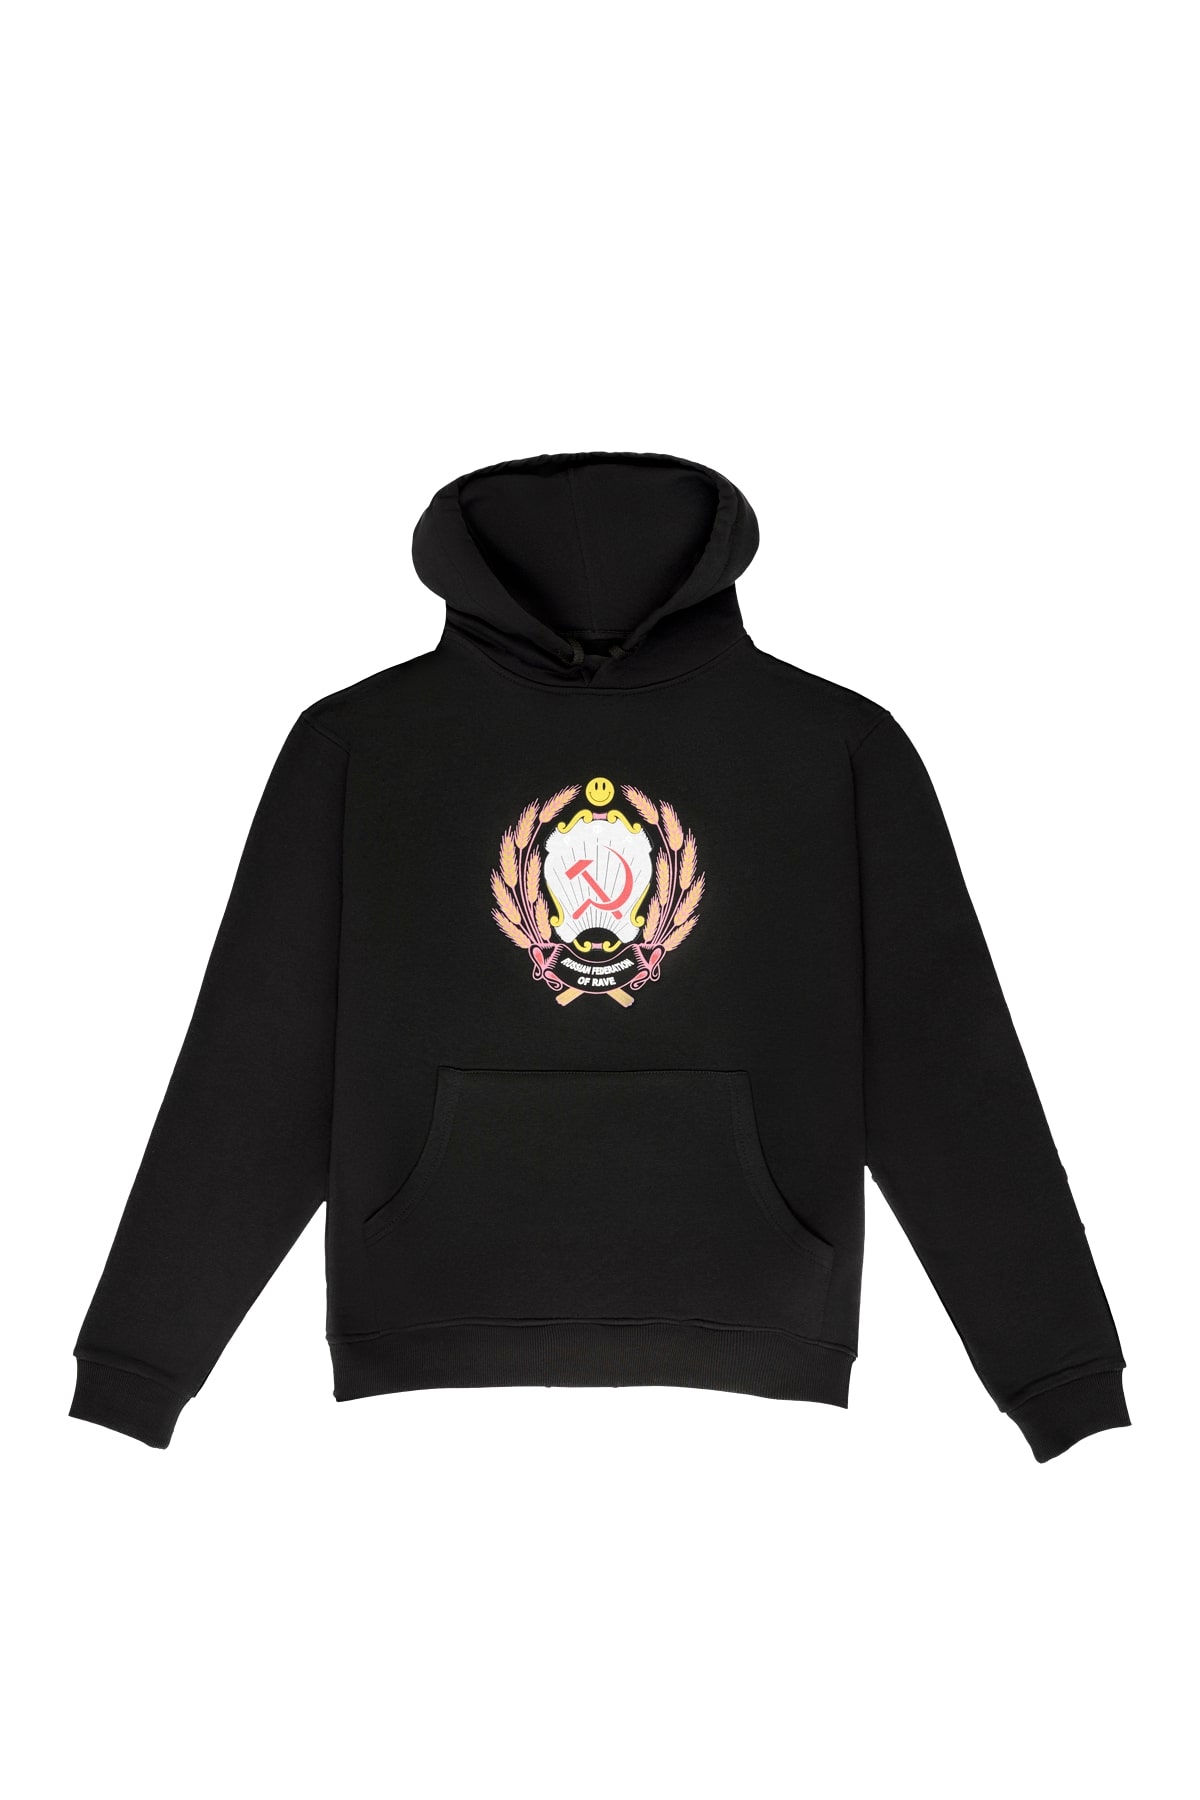 Hoodie Russian Federation of rave